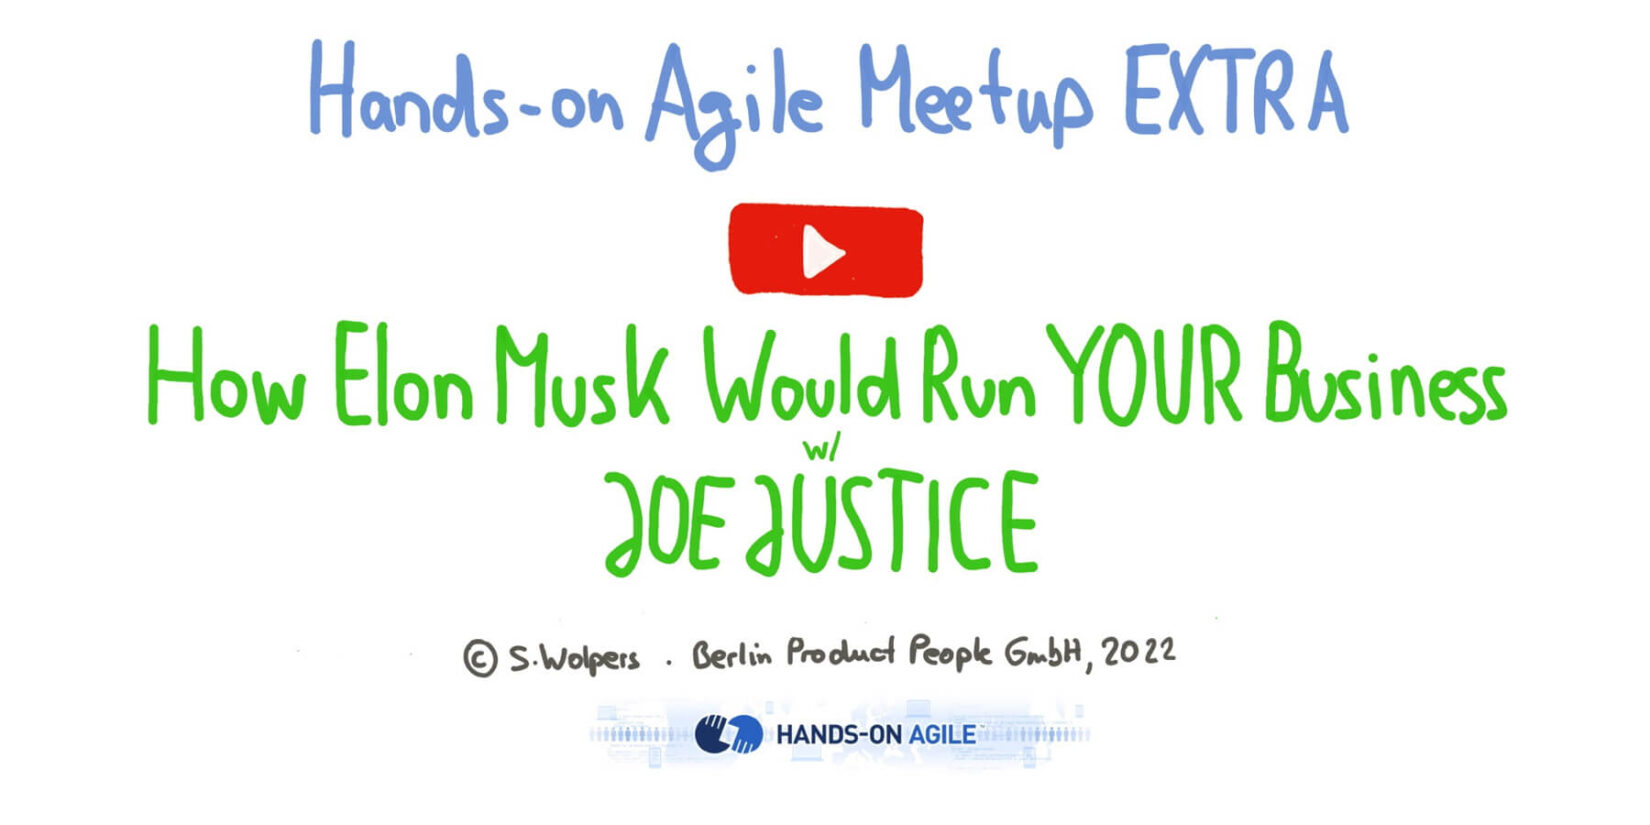 How Elon Musk Would Run YOUR Business mit Joe Justice — Hands-on Agile EXTRA — Age-of-Product.com